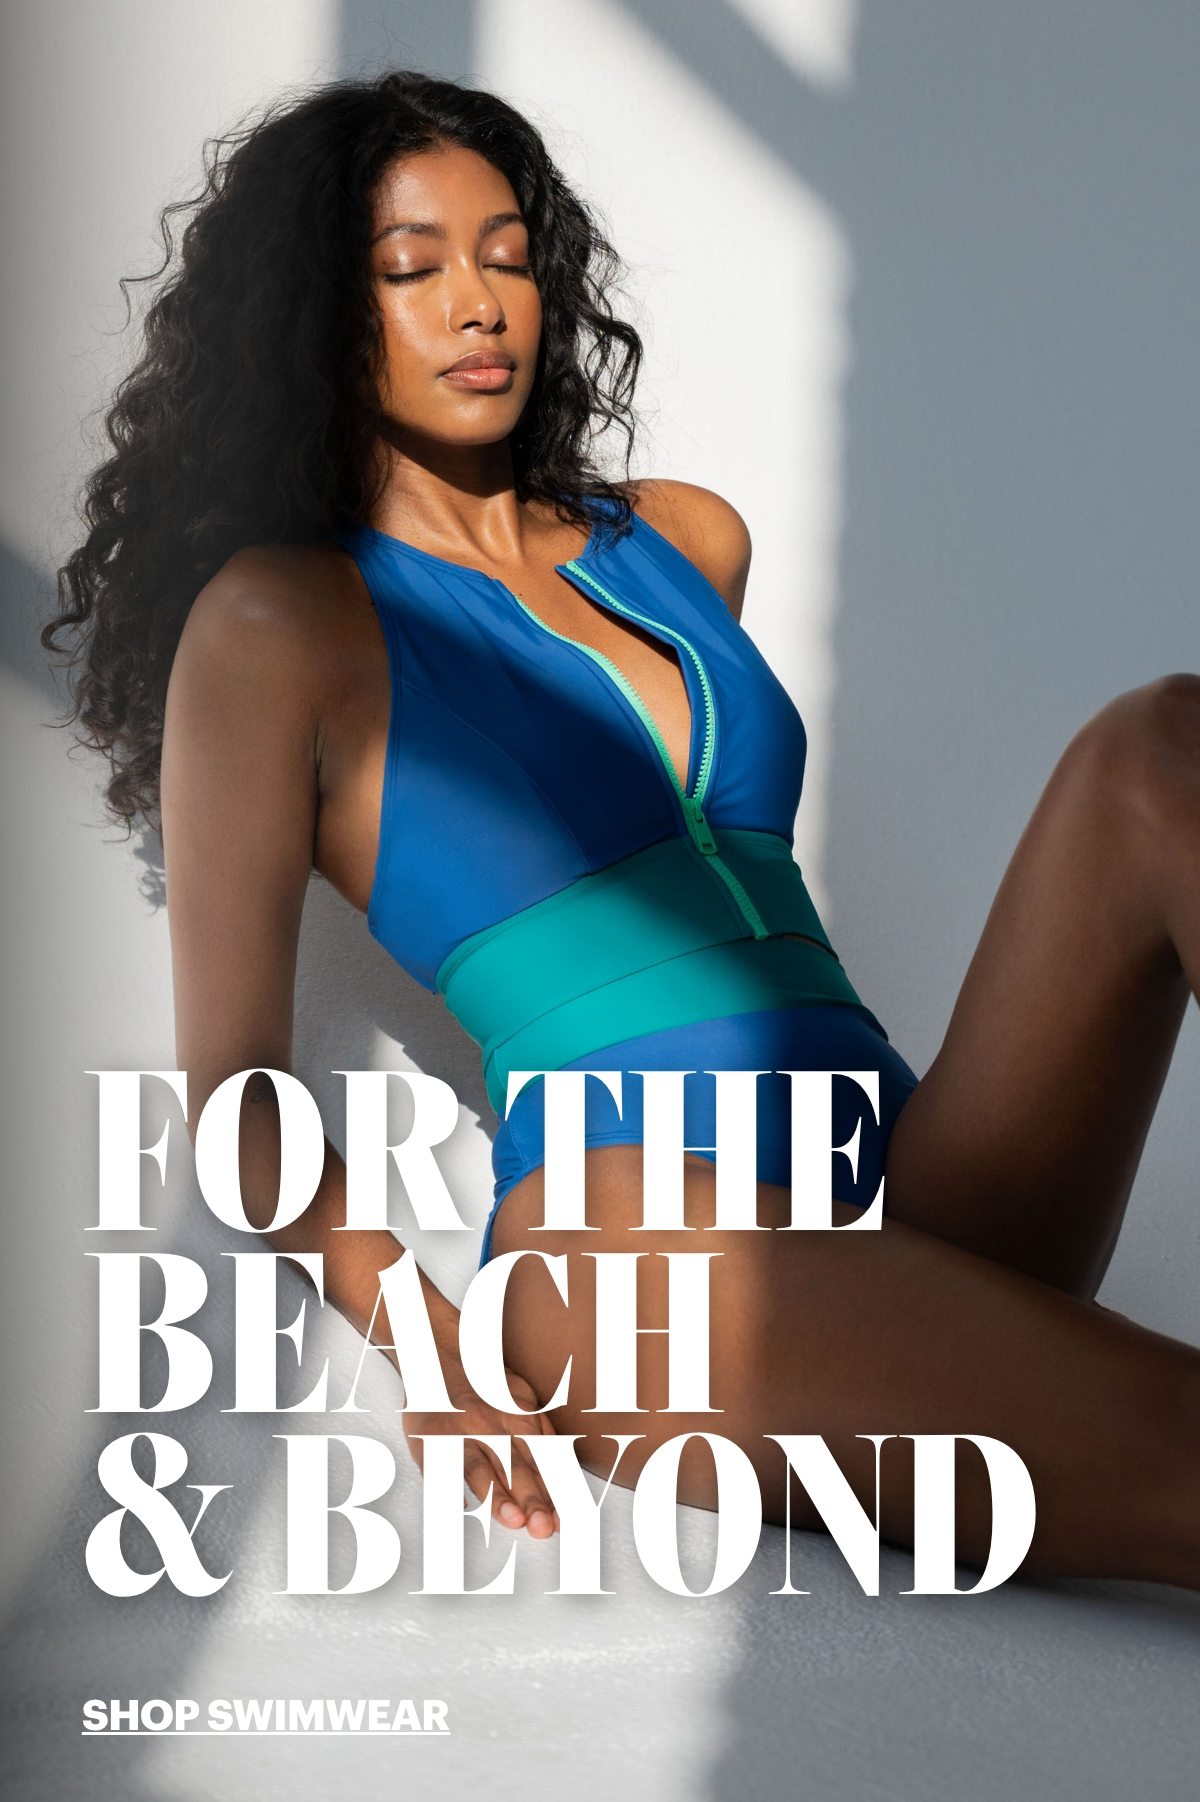 For the beach and beyond. Shop swimwear.